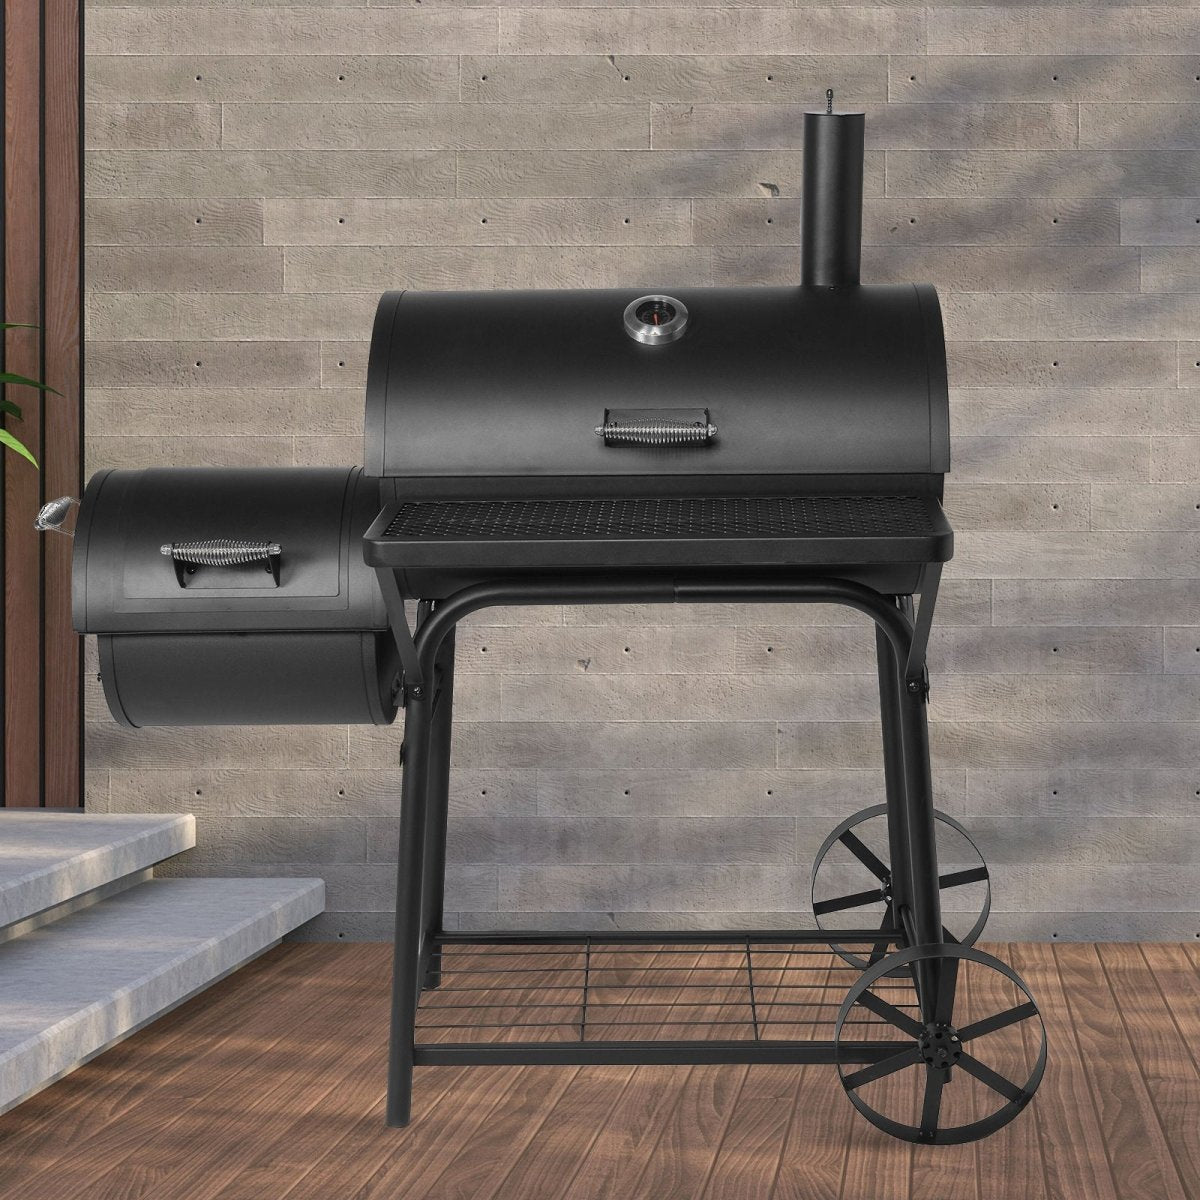 Havana Outdoors Charcoal 2-IN-1 BBQ Smoker Grill Barbecue Outdoor Cooking - Outdoorium